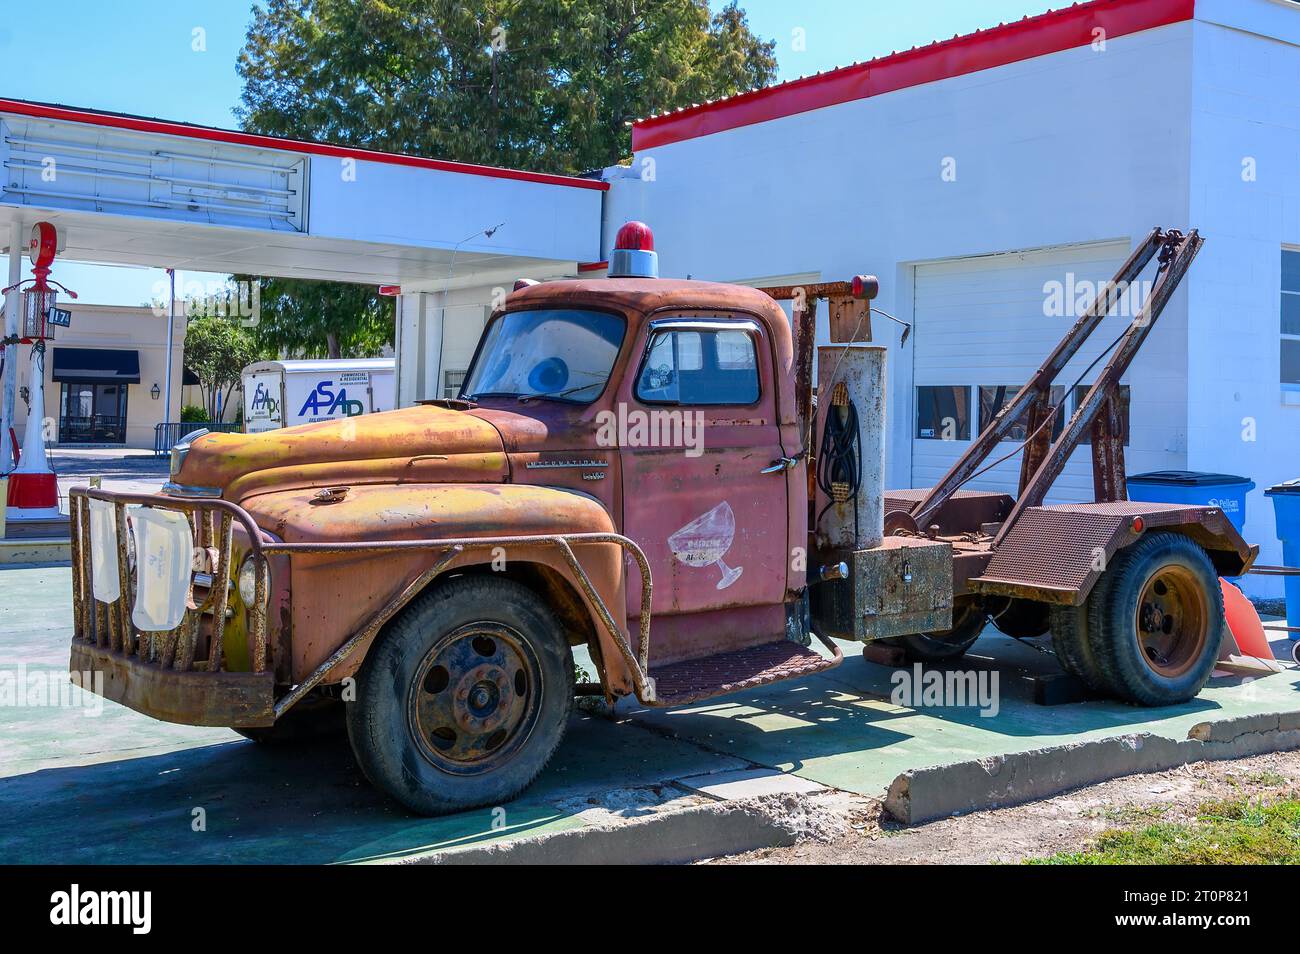 NEW ROADS, LA, USA - SEPTEMBER 19, 2023: Full view of a rusted 1950s International L-160 tow truck in front of a retro gas station Stock Photo